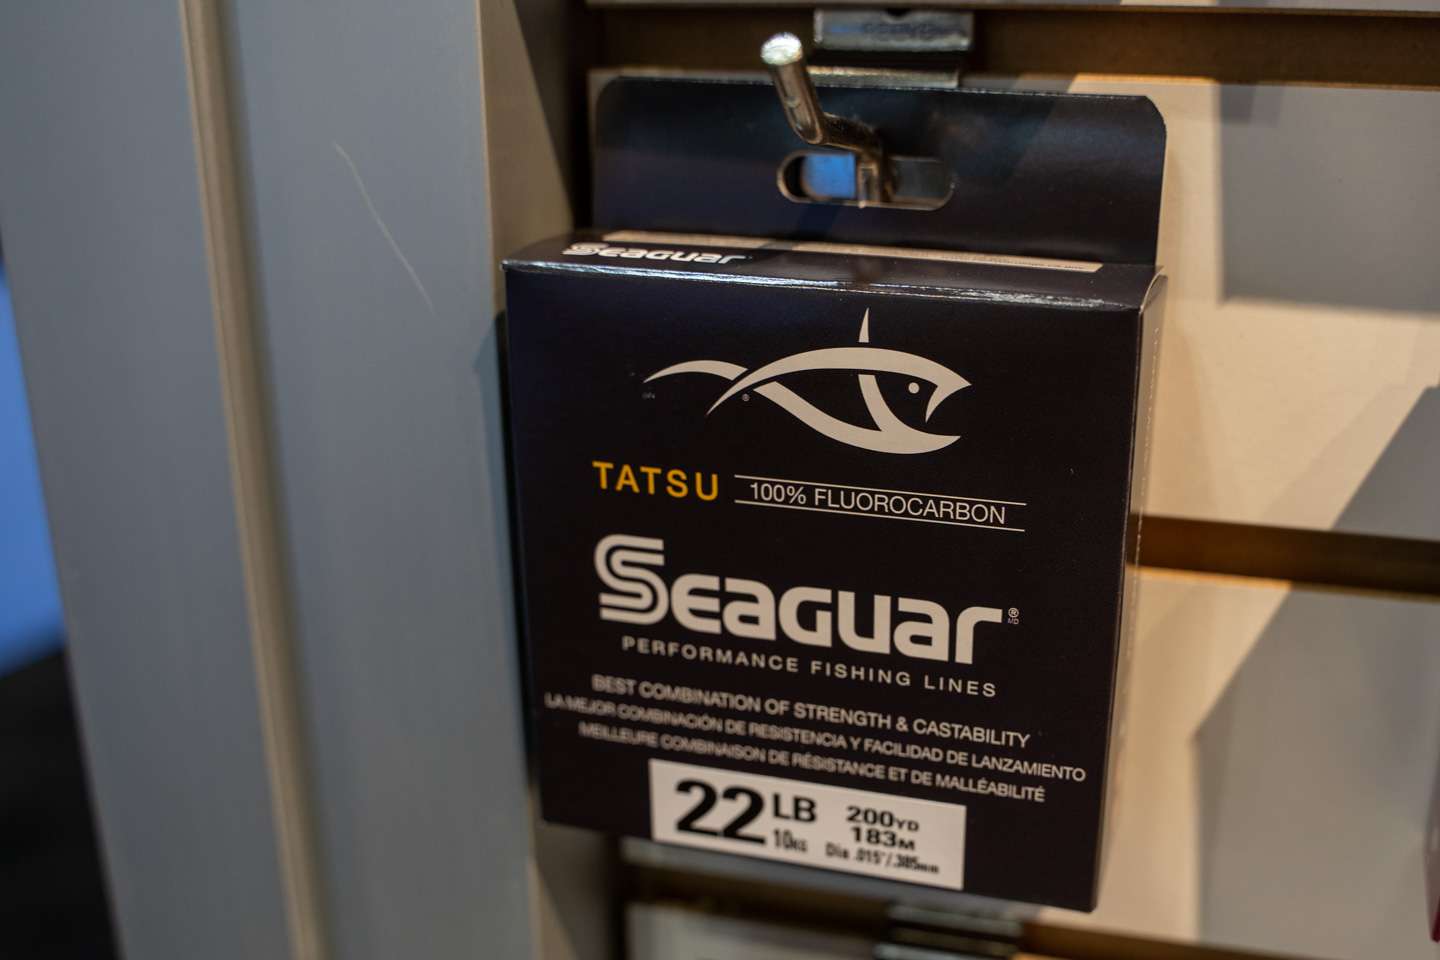 <b>Seaguar Tatsu (new sizes)</b><br>
Seaguar Tatsu is by no means new, but Seaguar has added two new sizes to their high-end fluorocarbon. 17- and 22-pound test. 